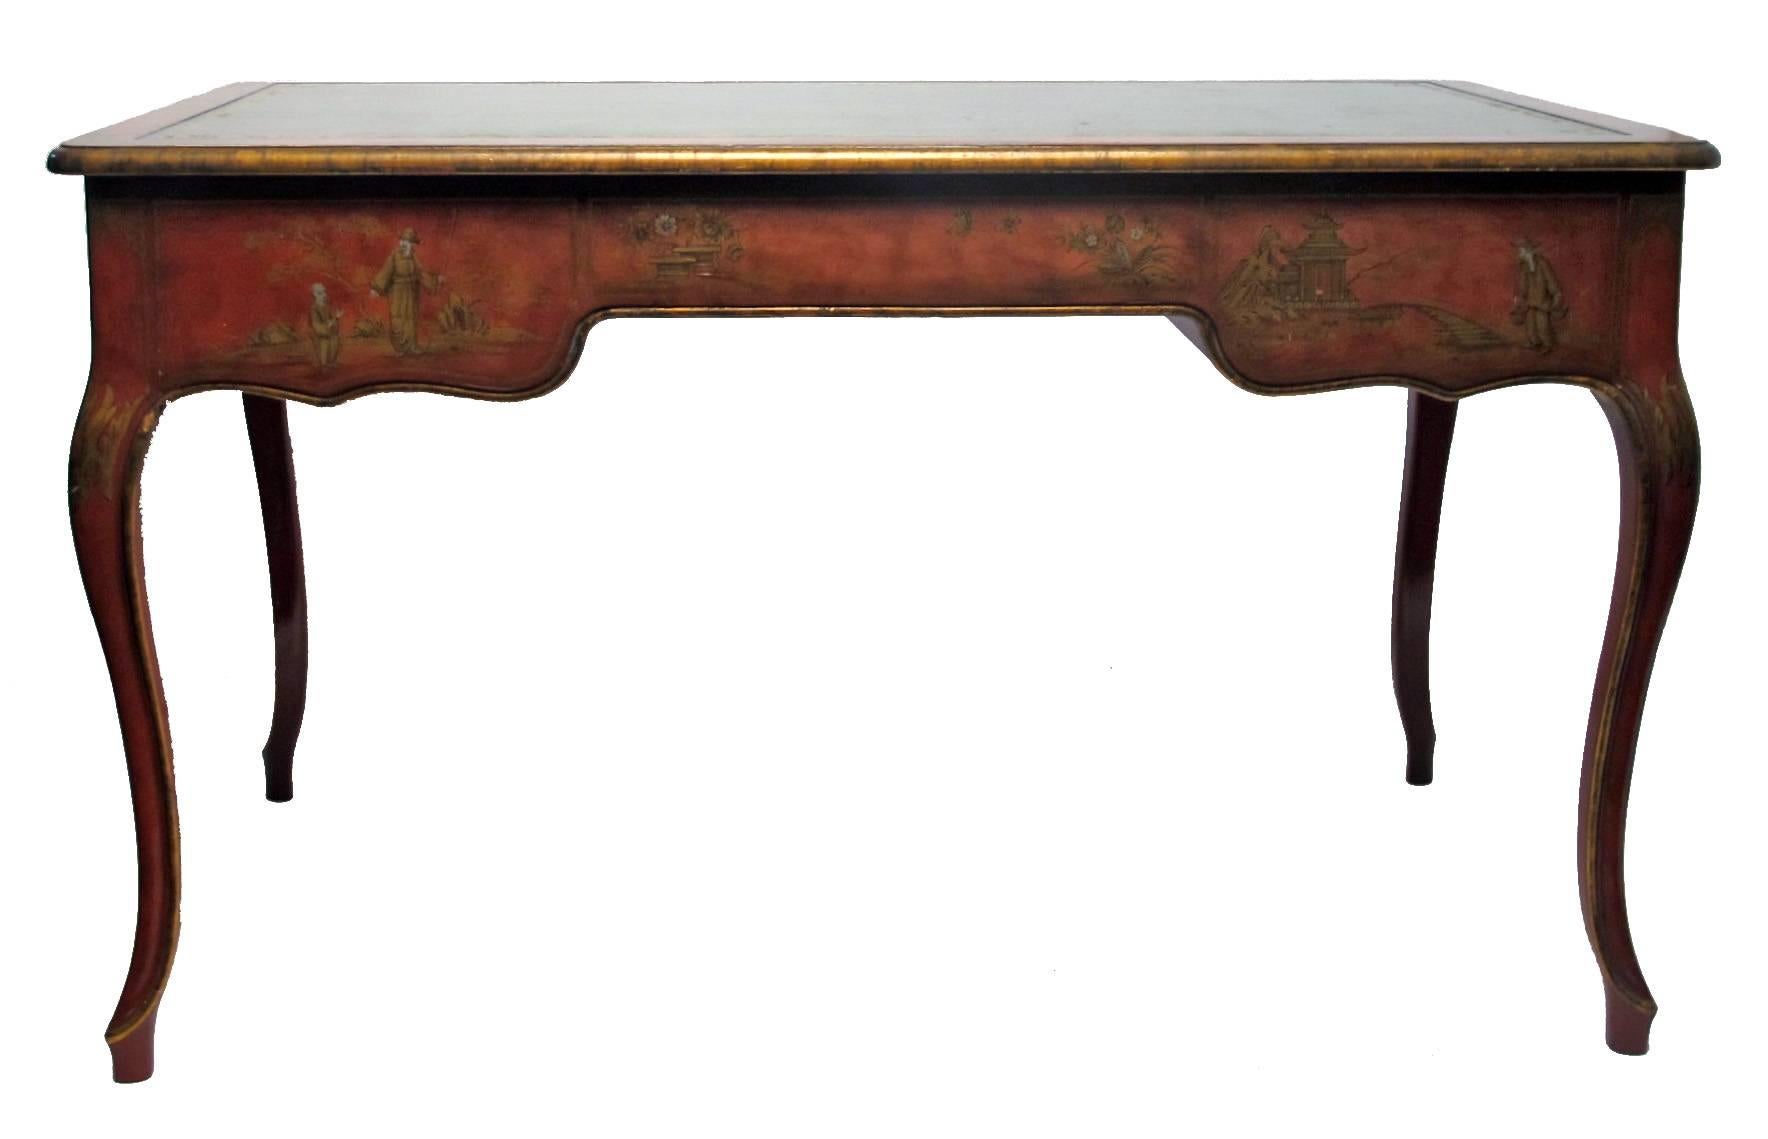 Baker, Knapp & Tubbs made writing table or desk with painted chinoiserie decoration and inset gilt tooled green leather top surface. Designed to float in a room, painted on all four sides. American made, 1940s-1950s.